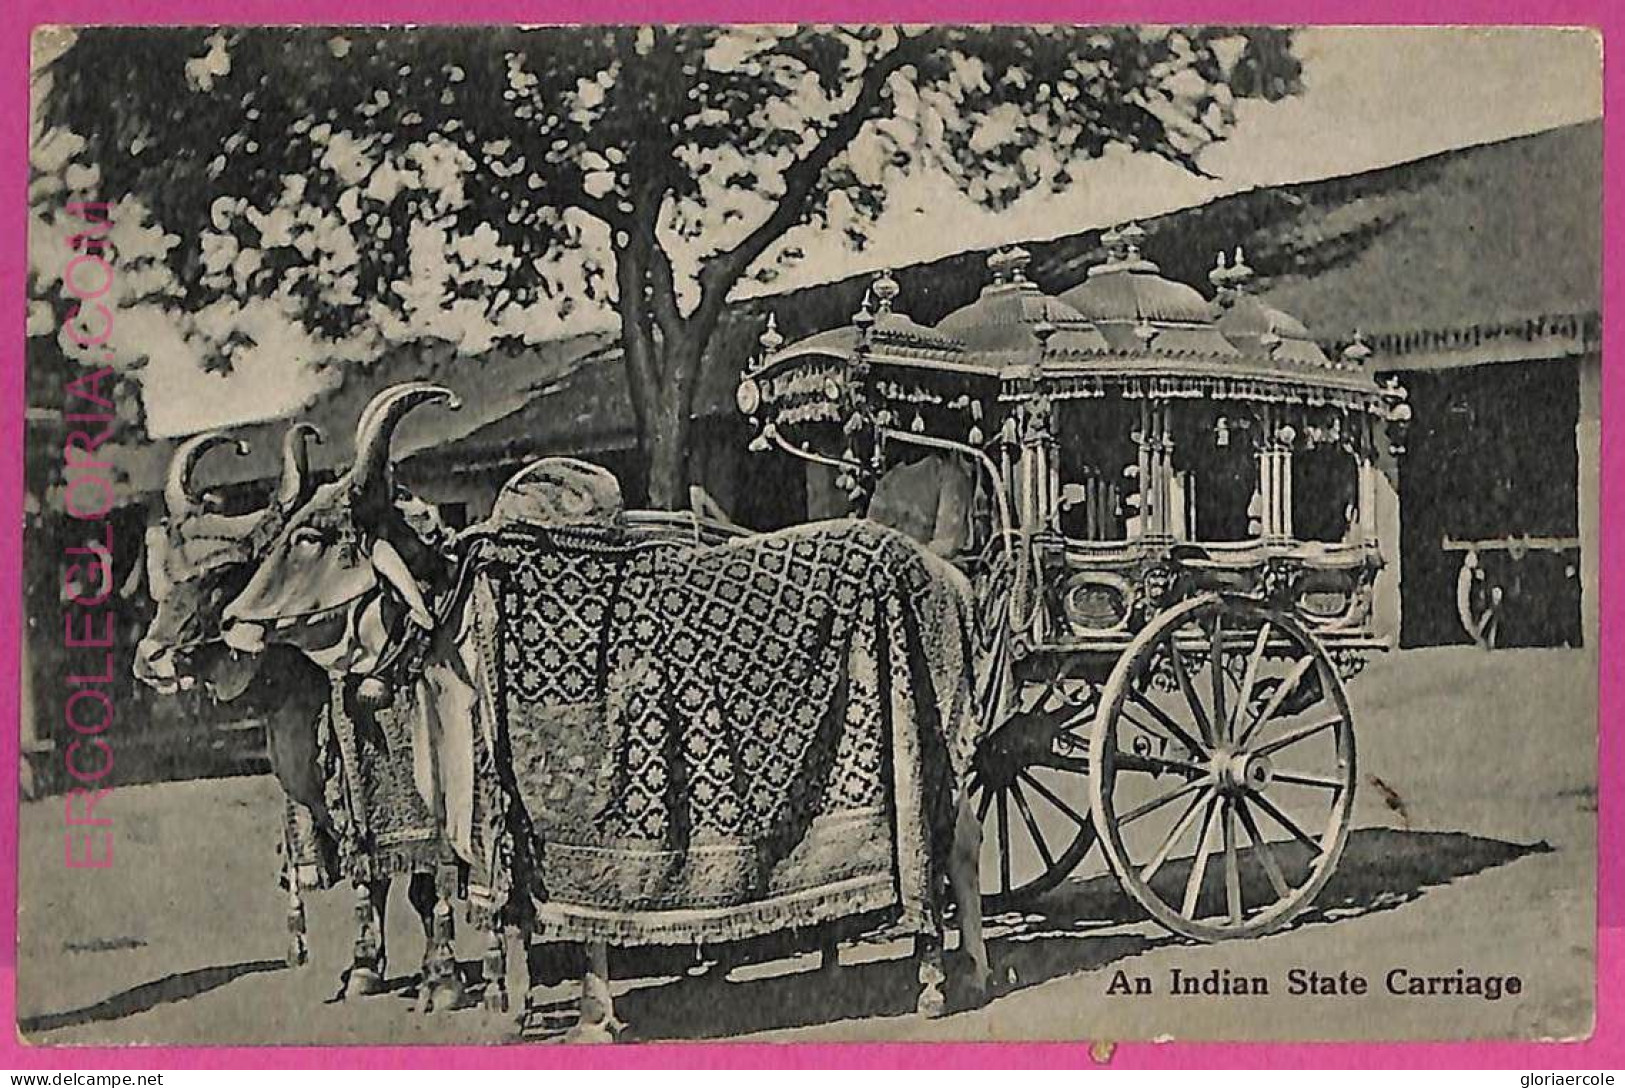 Ag3655 - INDIA - VINTAGE POSTCARD - Indian State Carriage, Ethnic - India